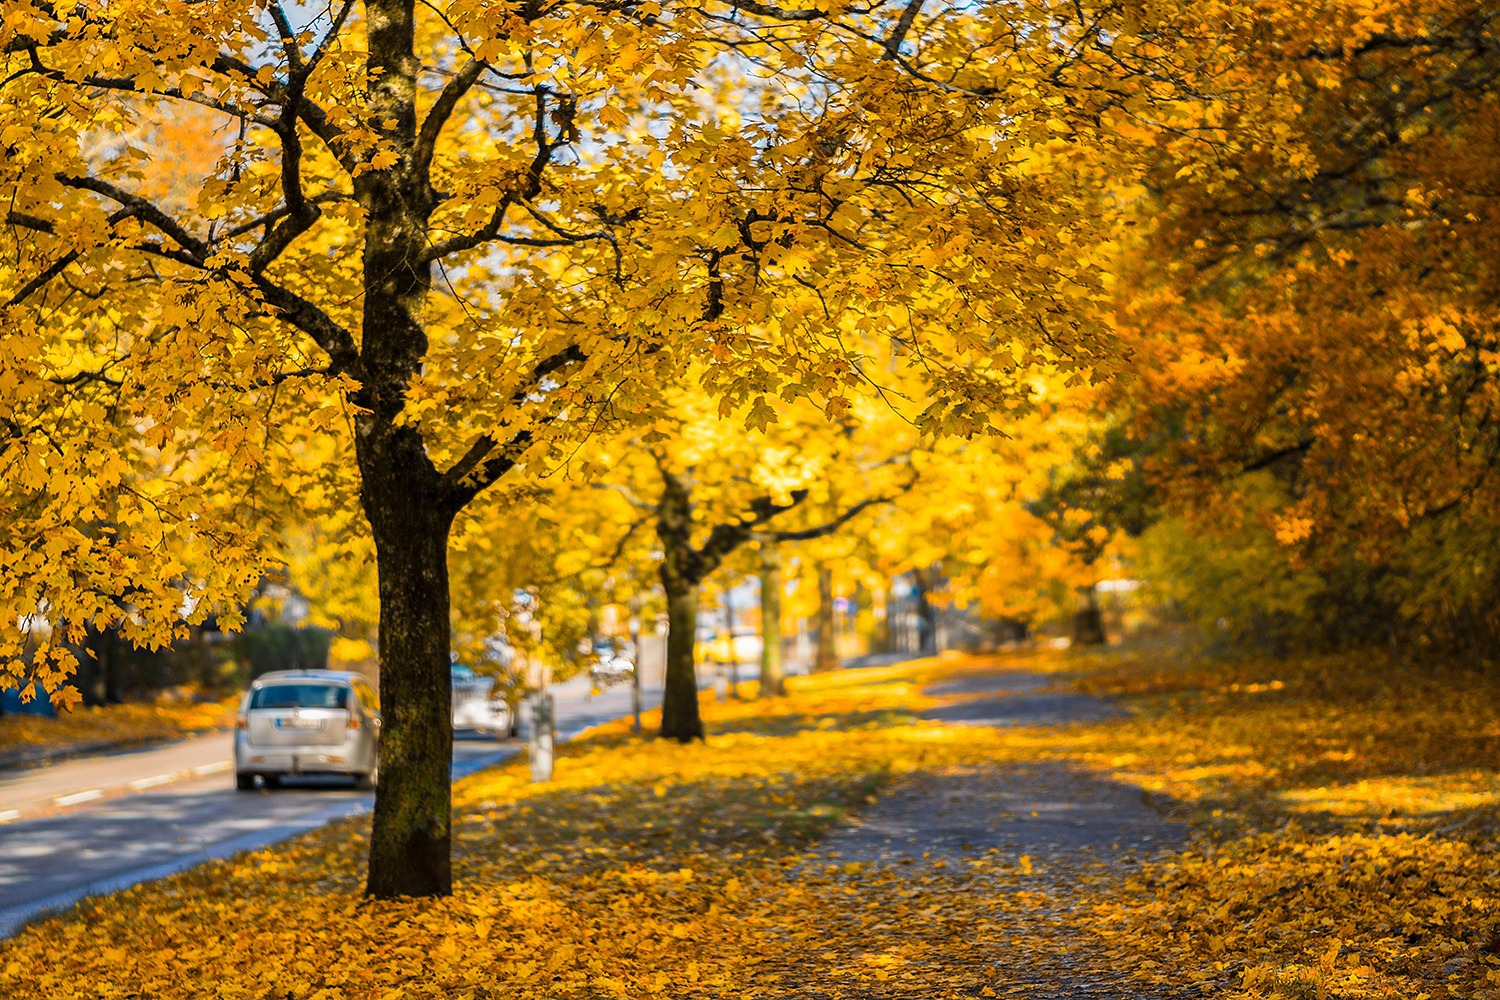 Trees with yellow leaves beside a street